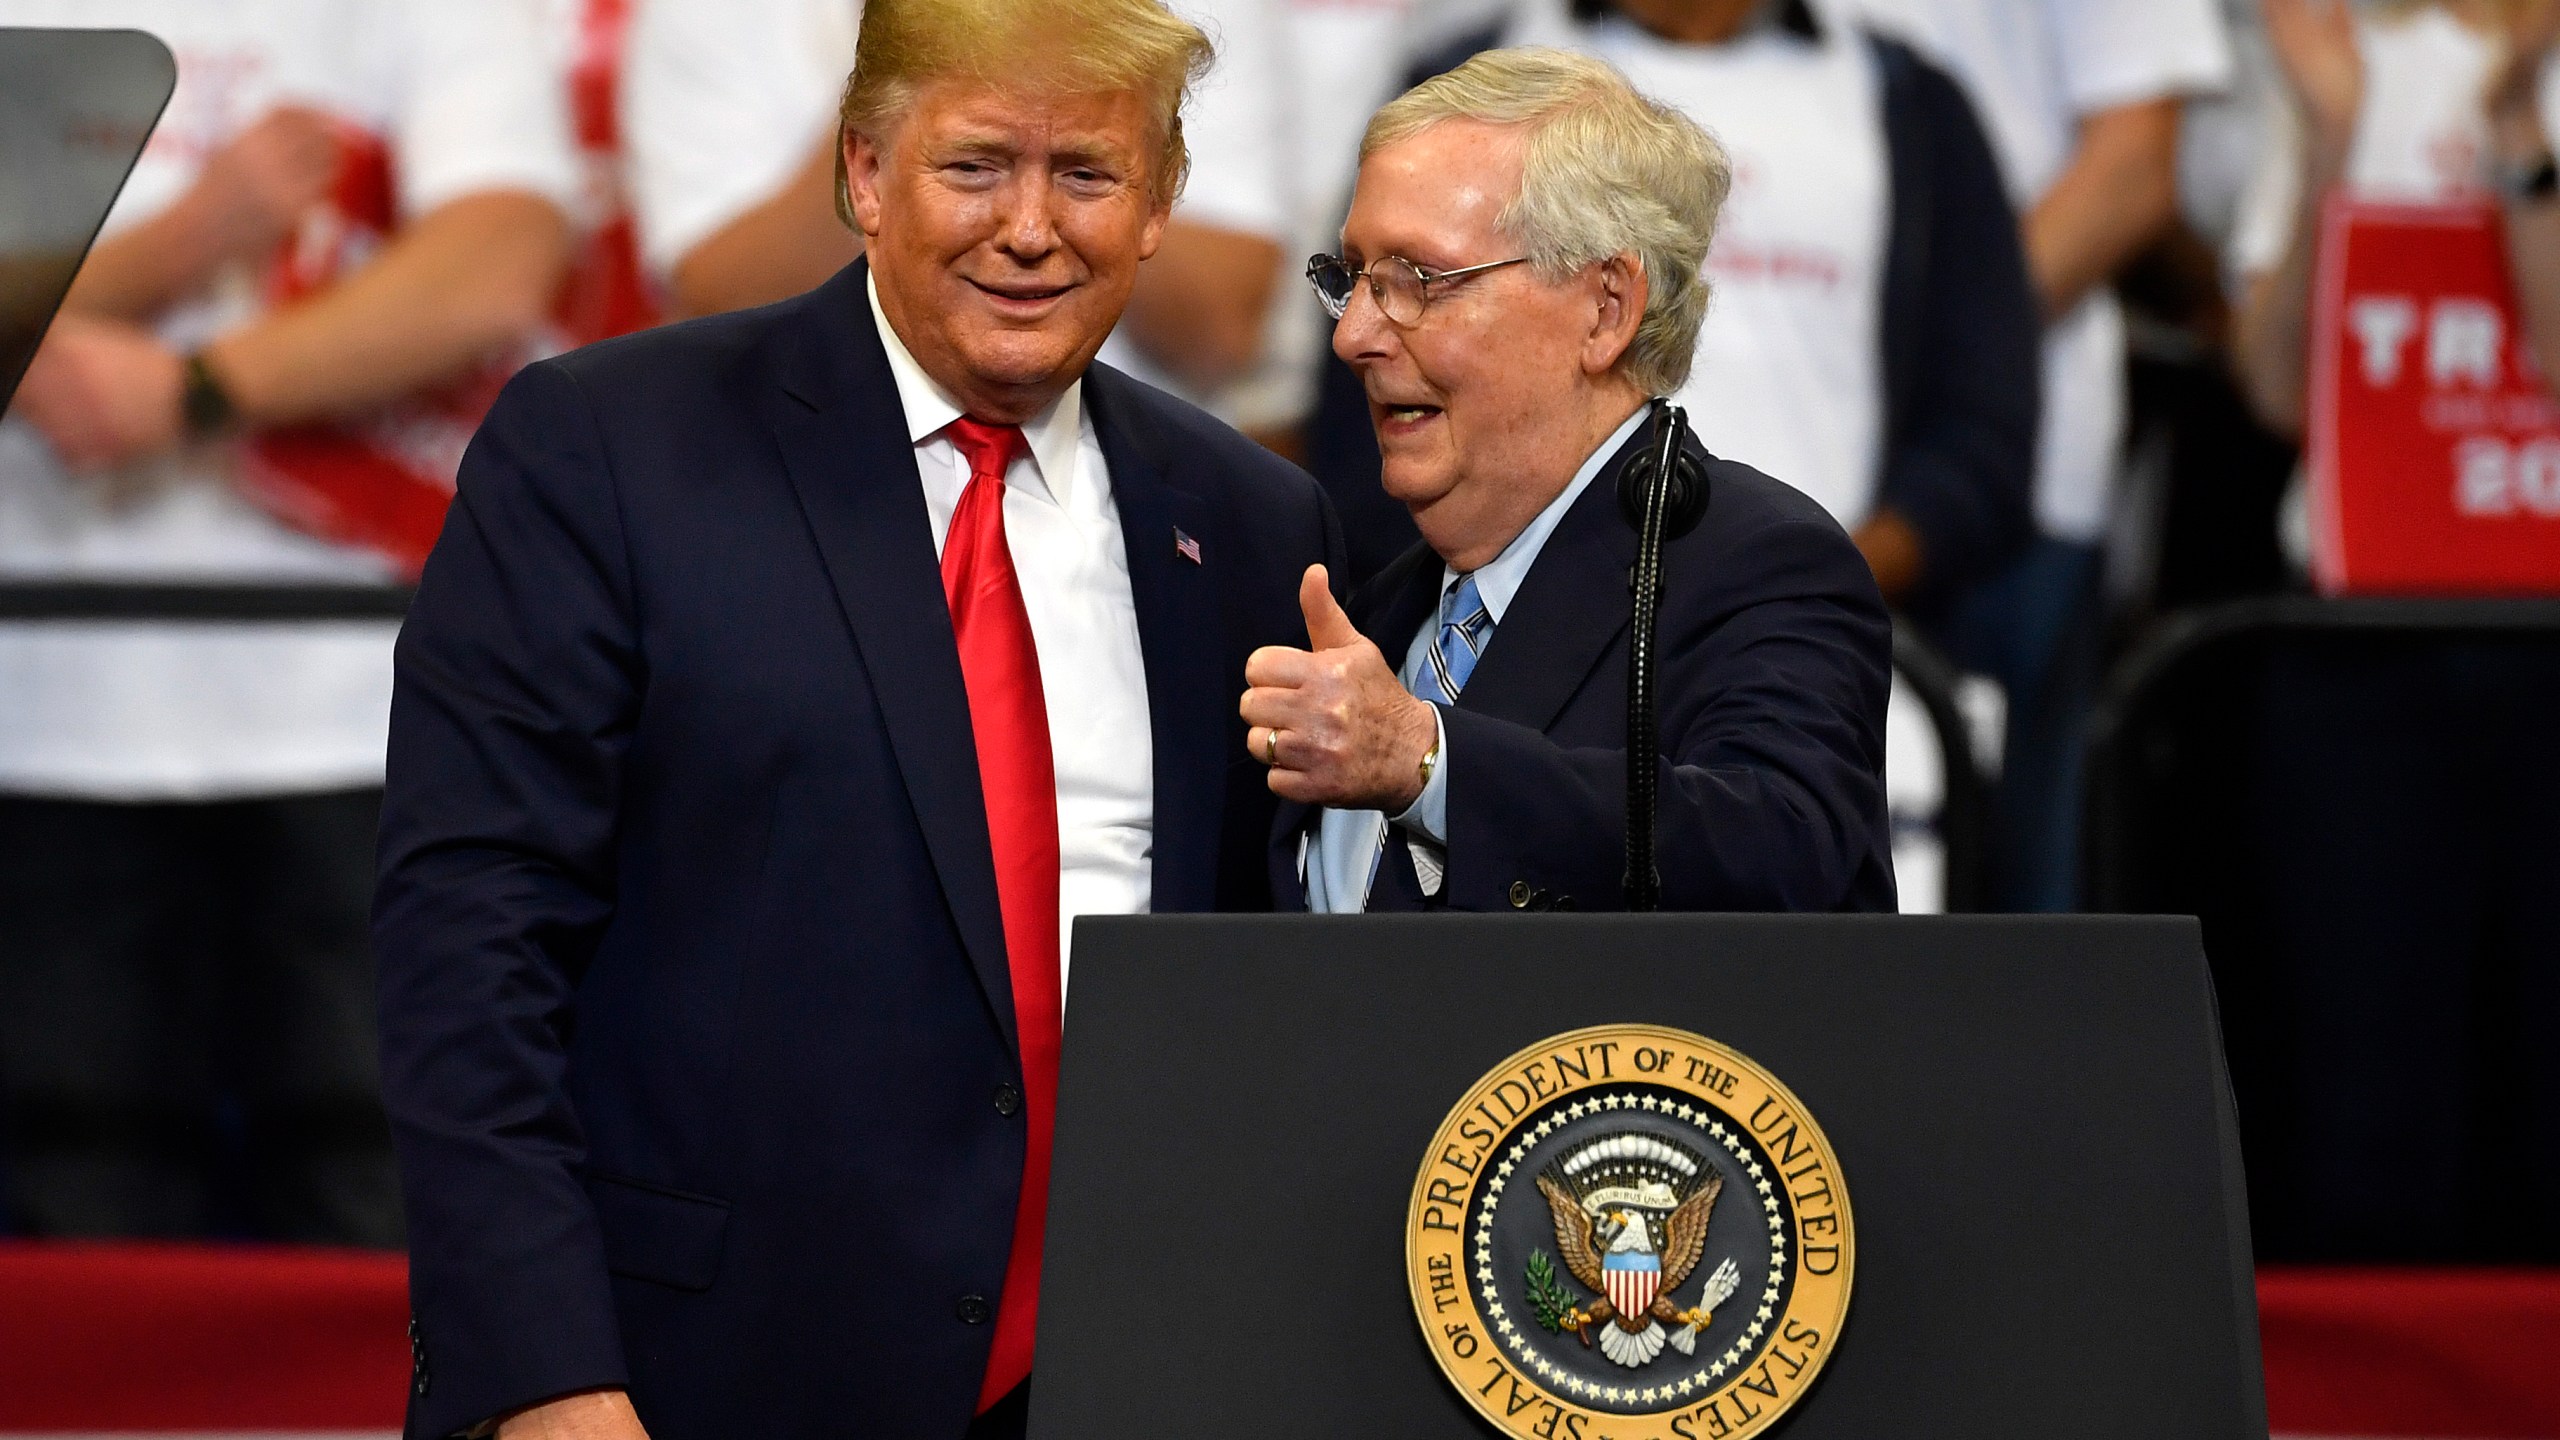 FILE - Then President Donald Trump, left, and Senate Majority Leader Mitch McConnell of Ky., greet each other during a campaign rally in Lexington, Ky., Nov. 4, 2019. McConnell has endorsed Donald Trump for president. McConnell announced his decision after Super Tuesday wins pushed Trump, who is the GOP front-runner, closer to the party nomination. It’s a remarkable turnaround for McConnell, who has blamed Trump for “disgraceful” acts in the Jan. 6, 2021, attack on the Capitol. (AP Photo/Timothy D. Easley, File)